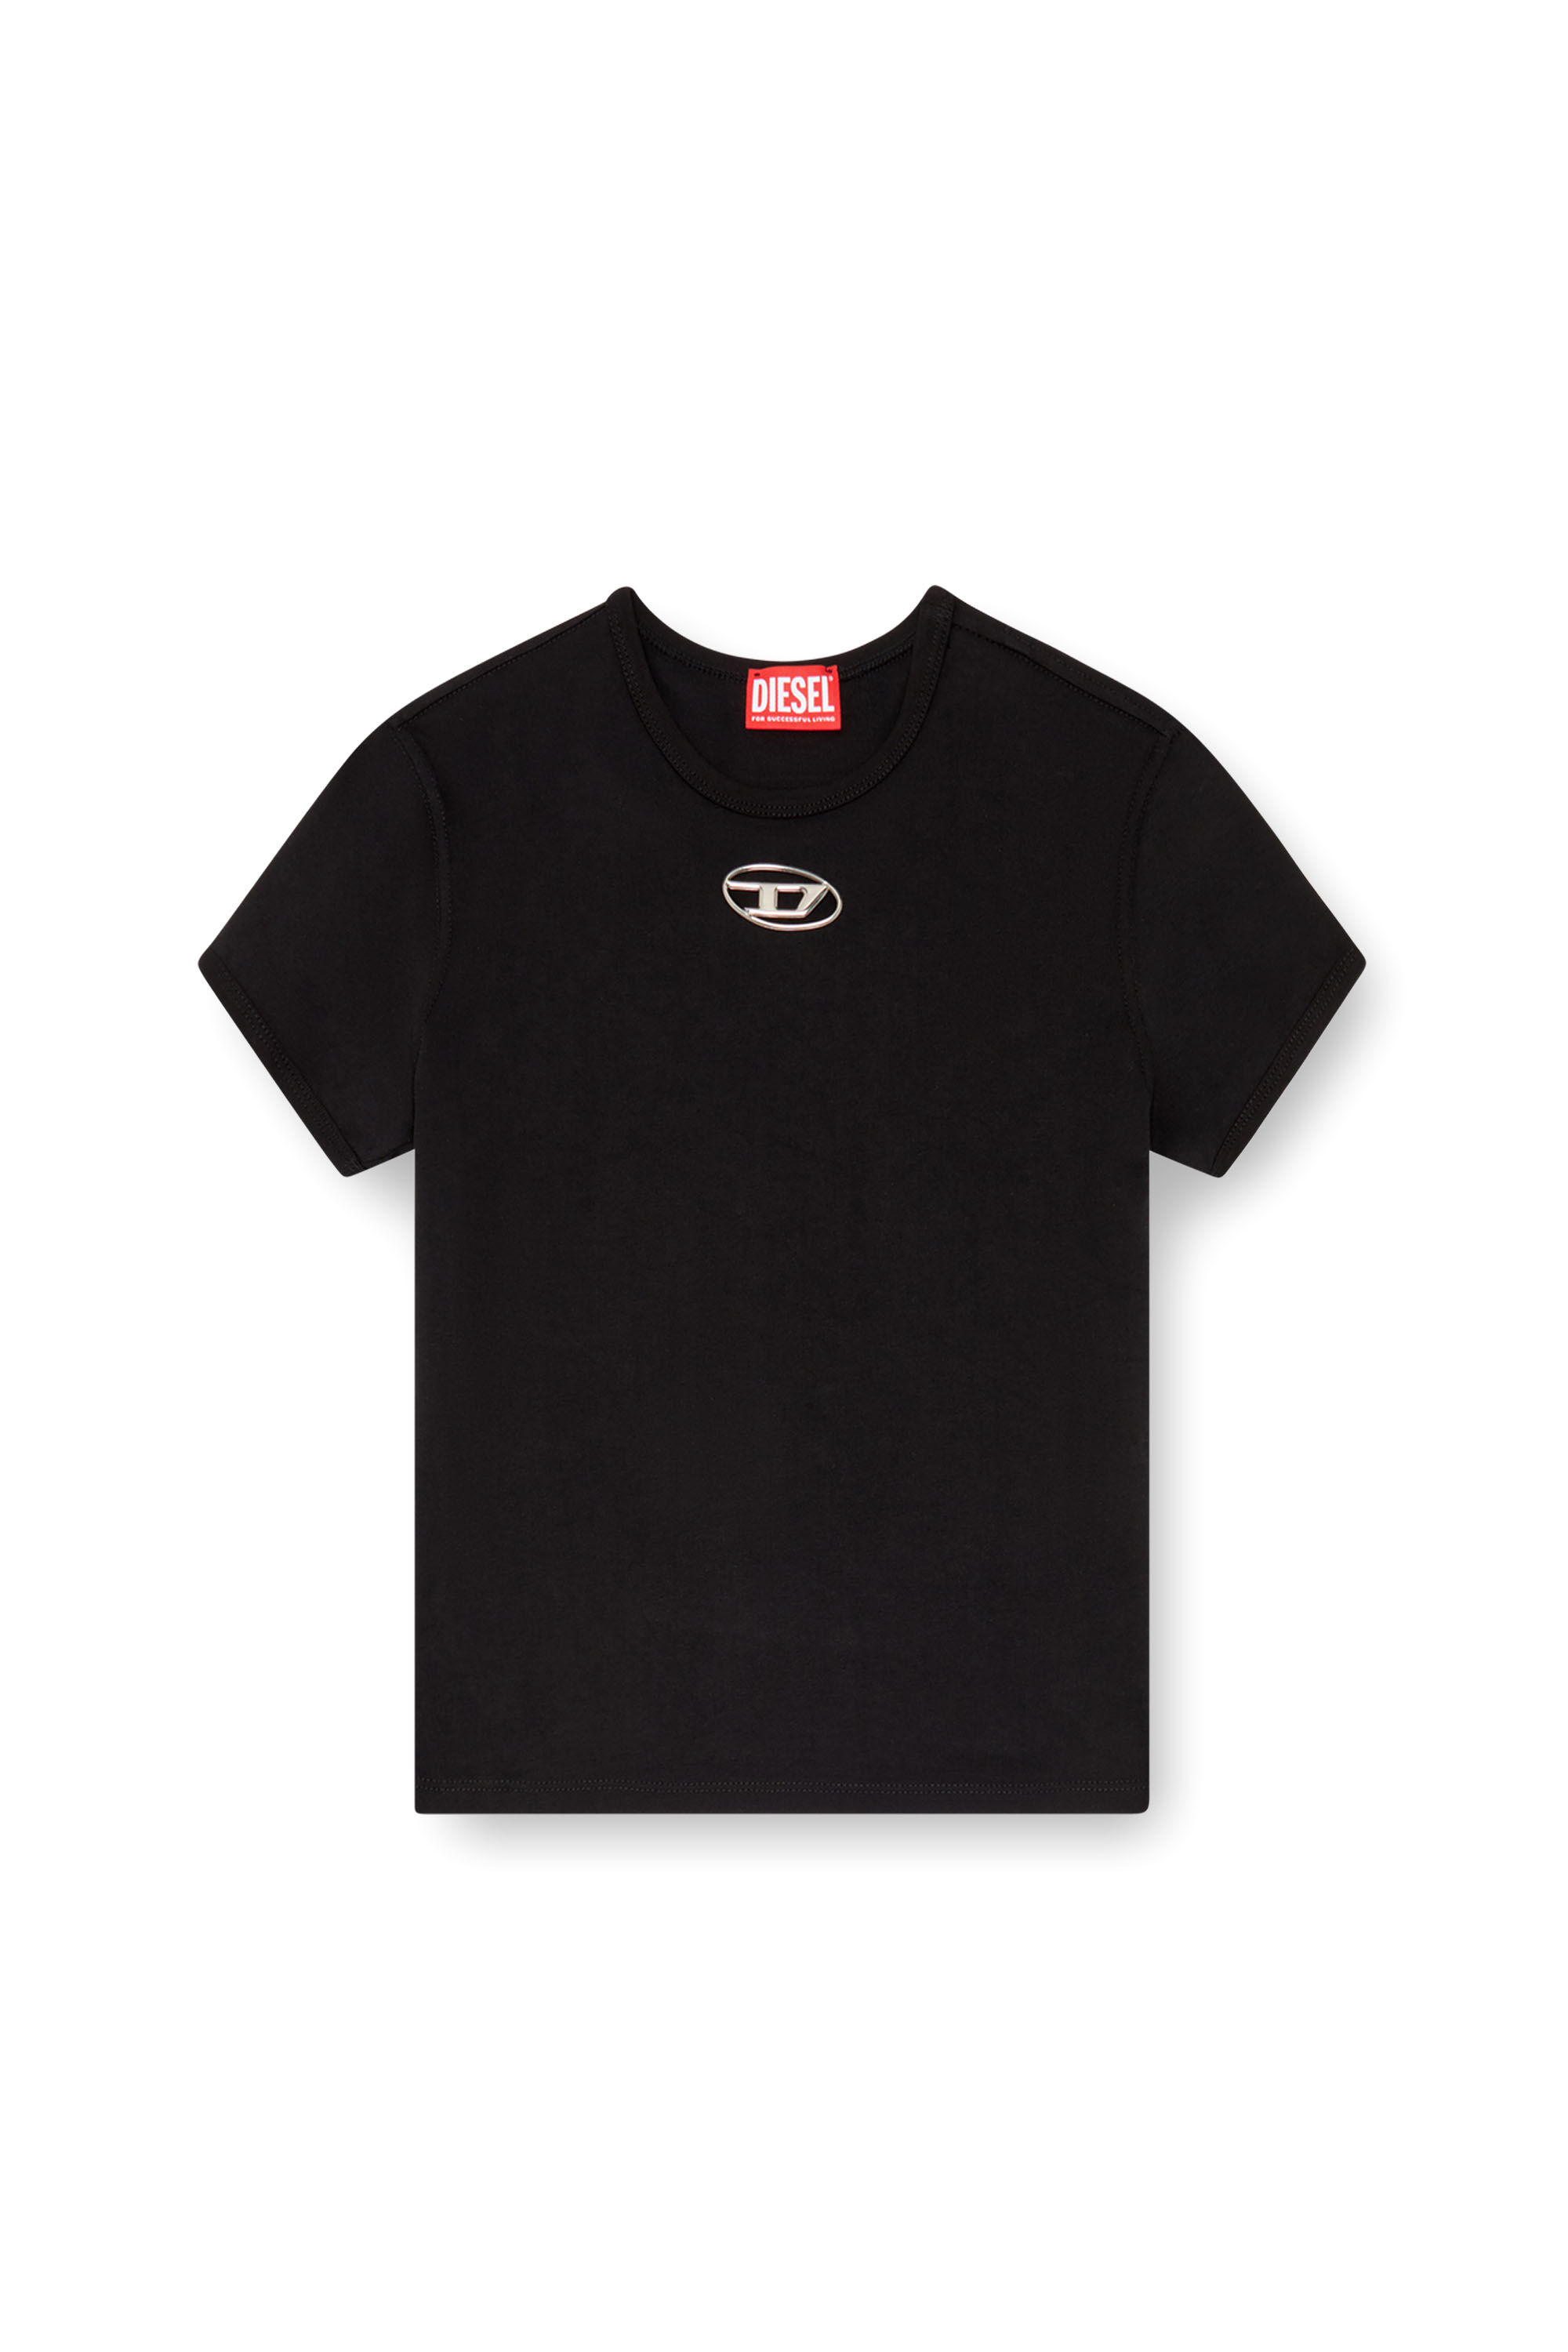 T-UNCUTIE-LONG-OD T-shirt with injection-moulded Oval D｜ブラック ...